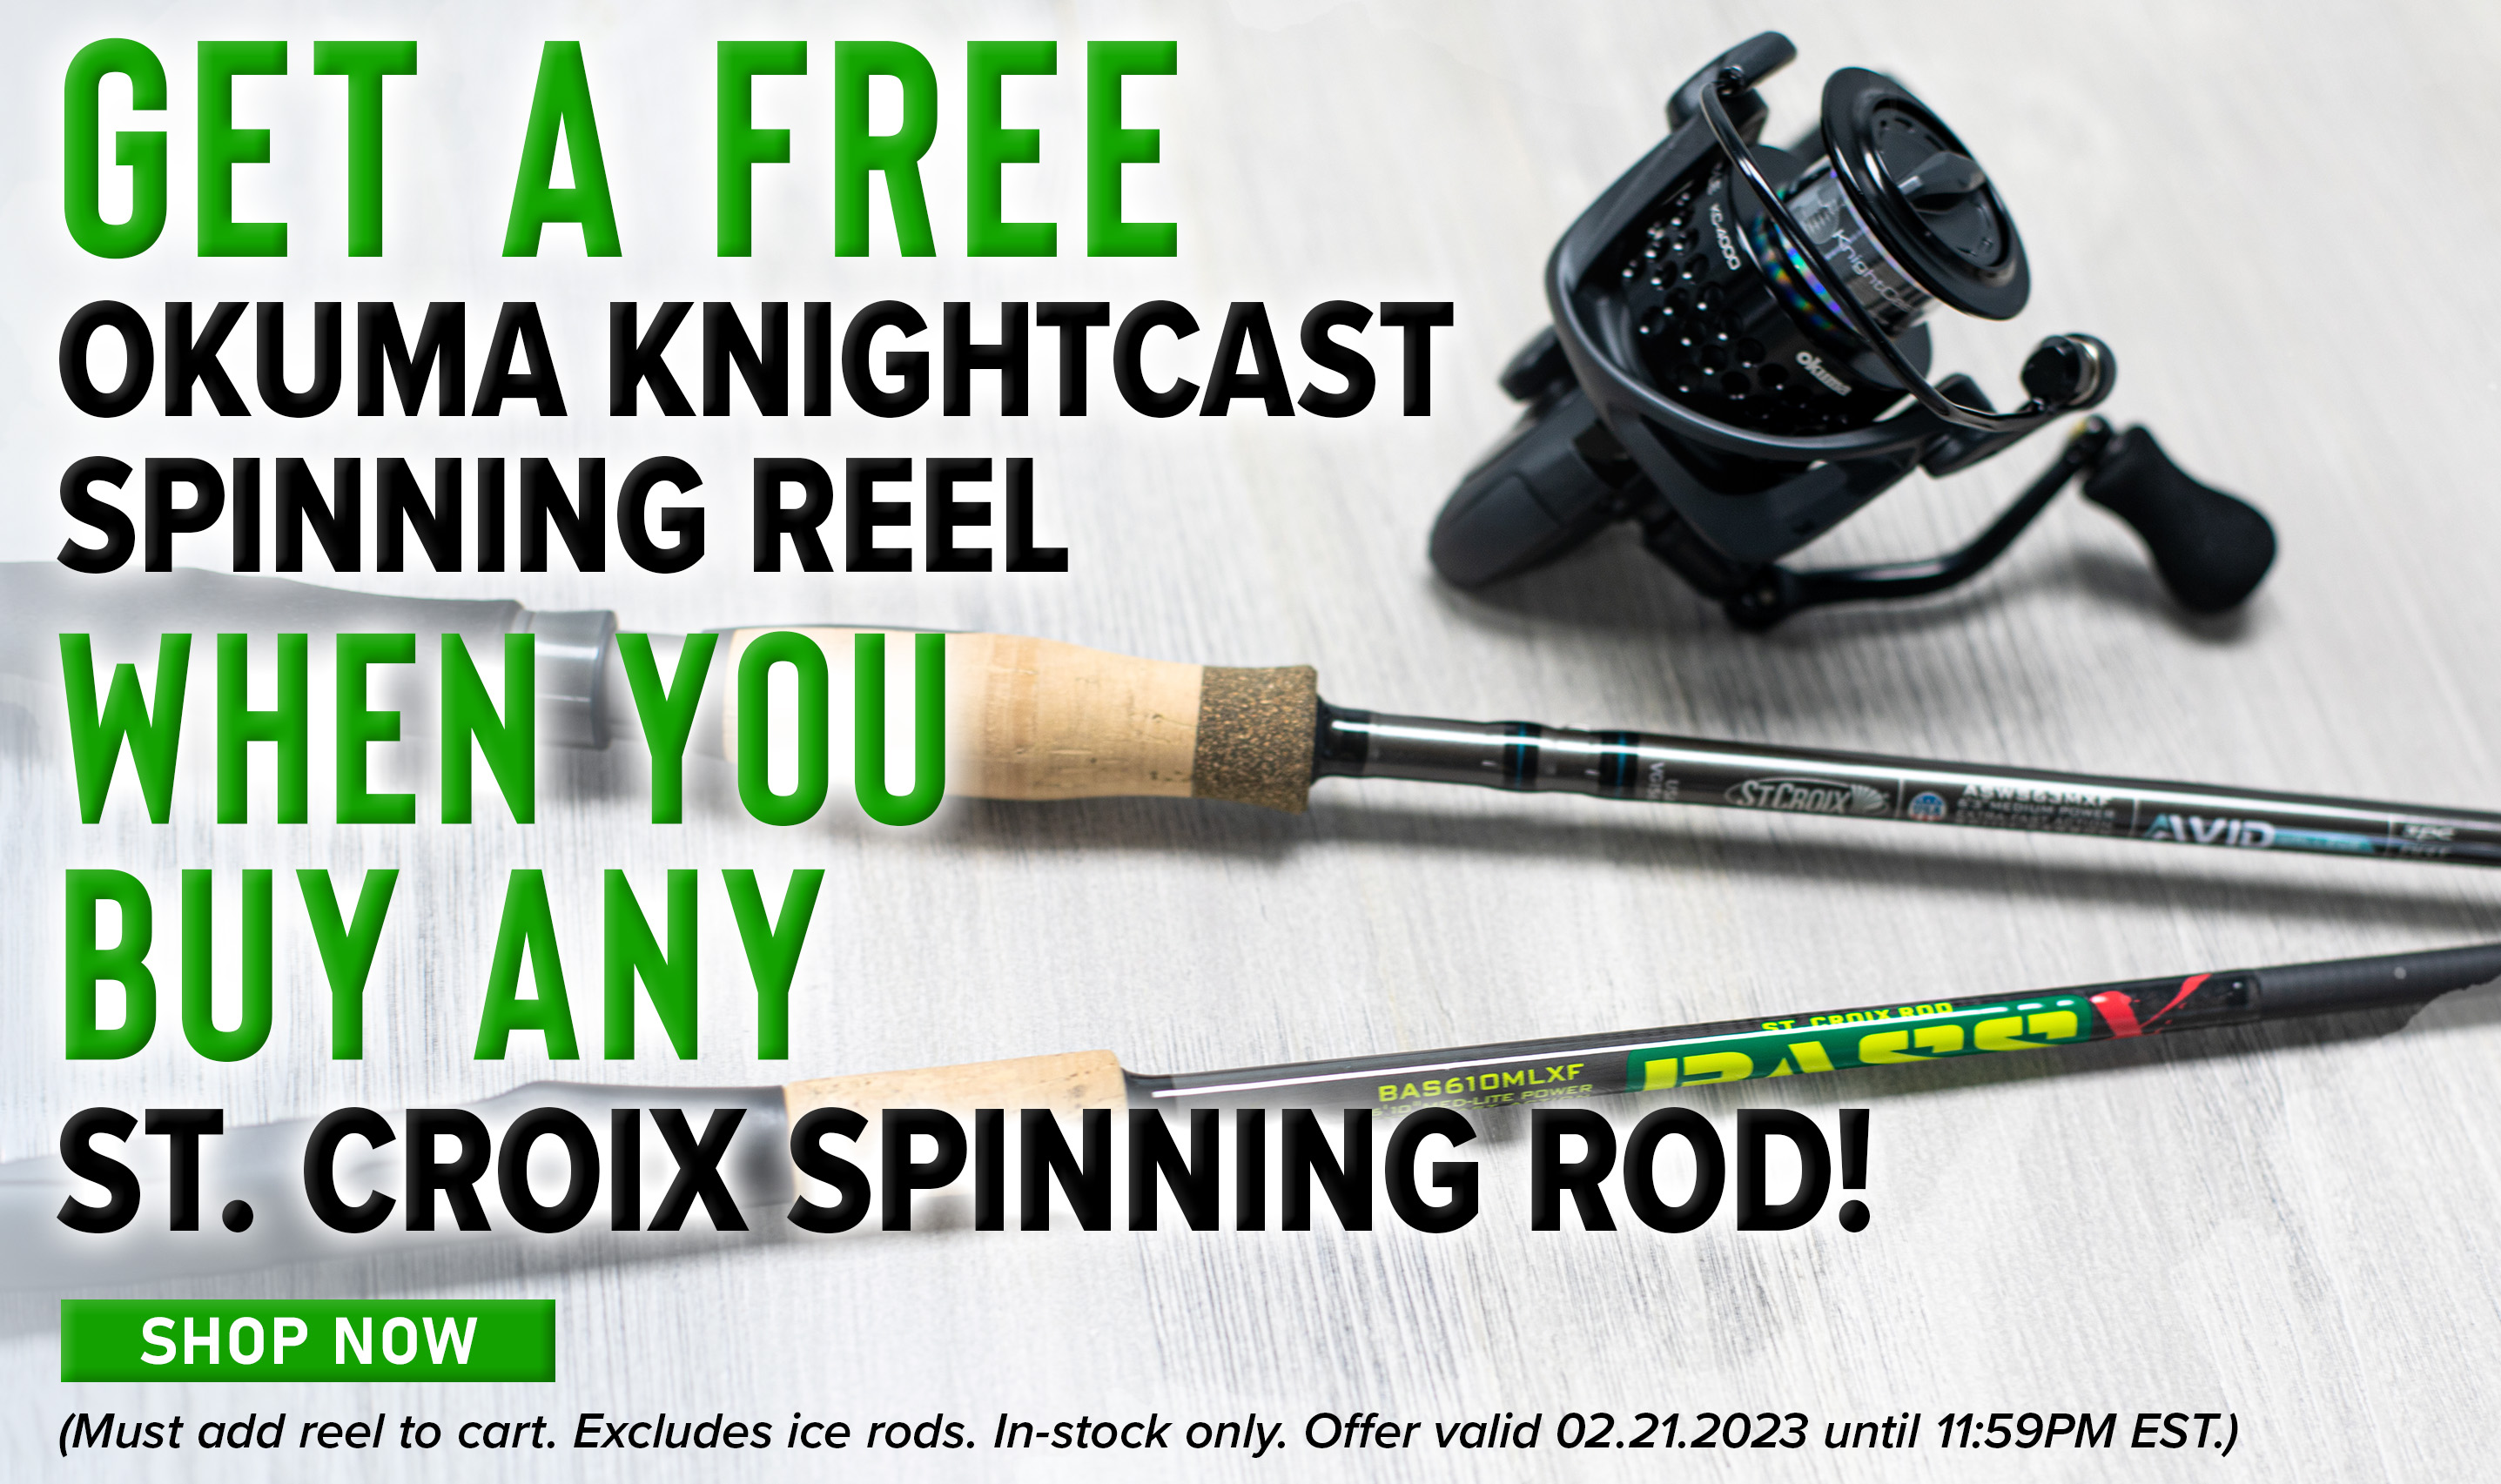 Buy a St. Croix Spinning Rod and Get a Free Okuma KnightCast